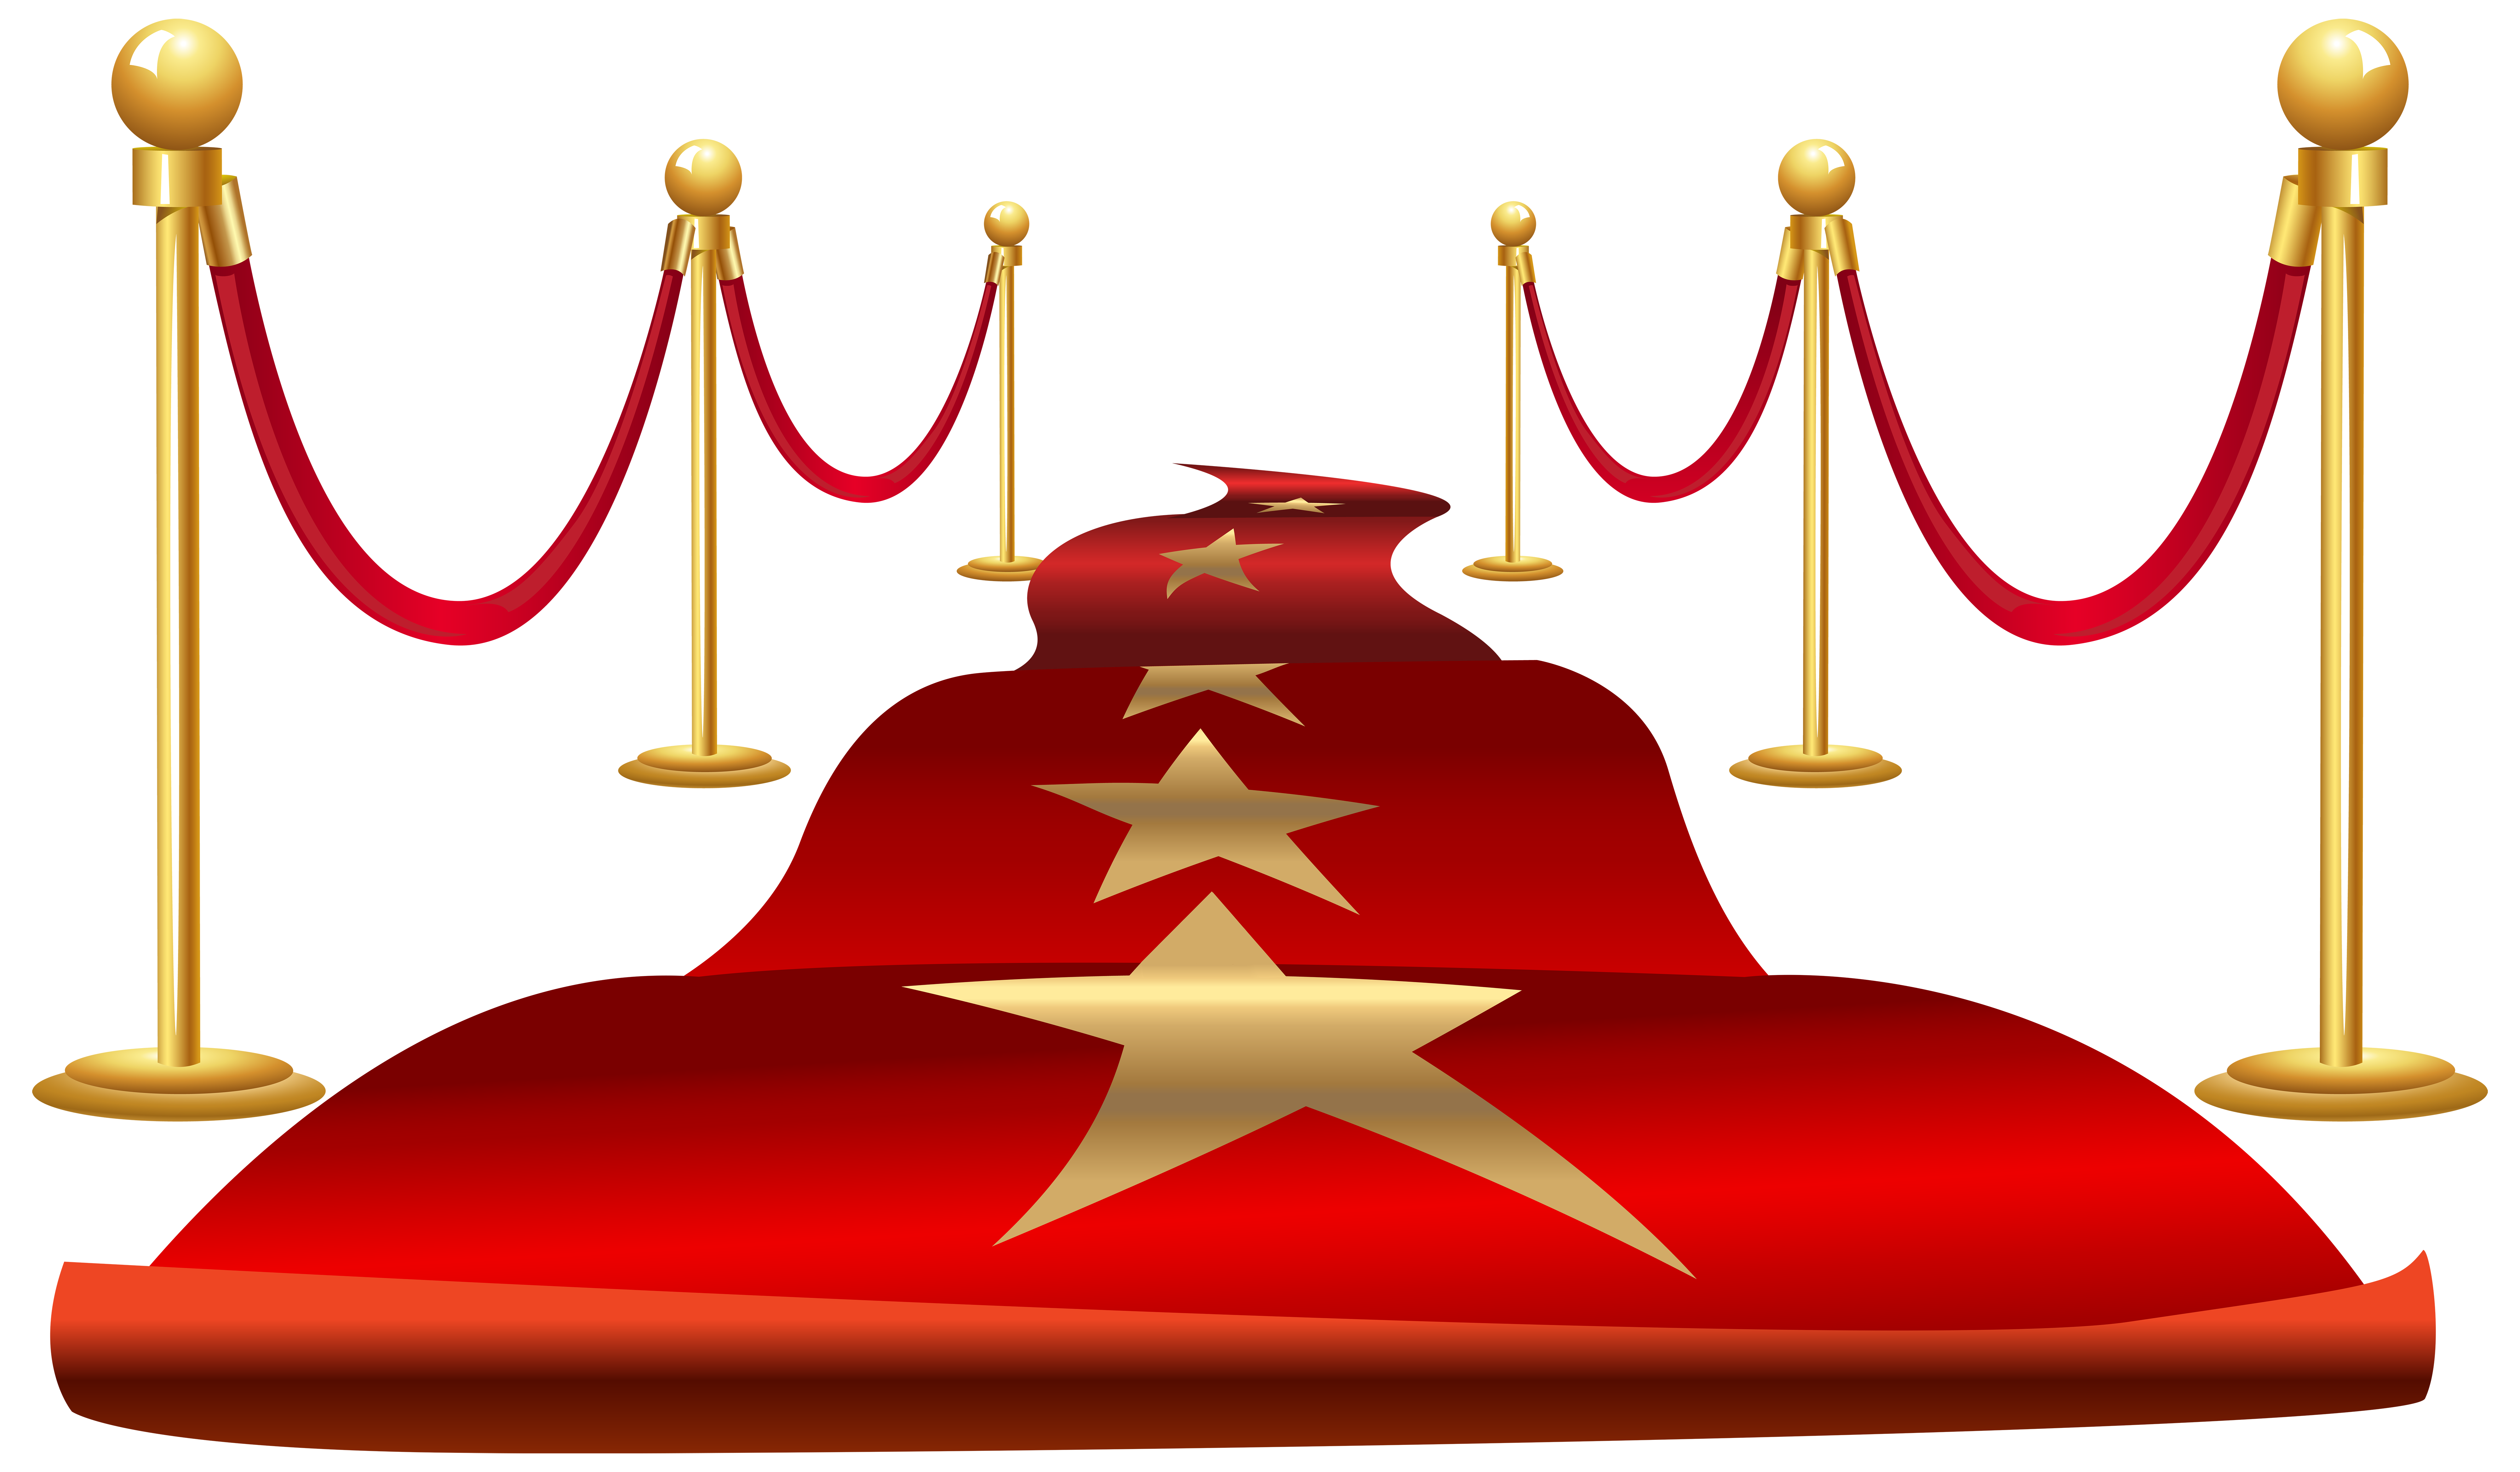 free clipart images red carpet - photo #22